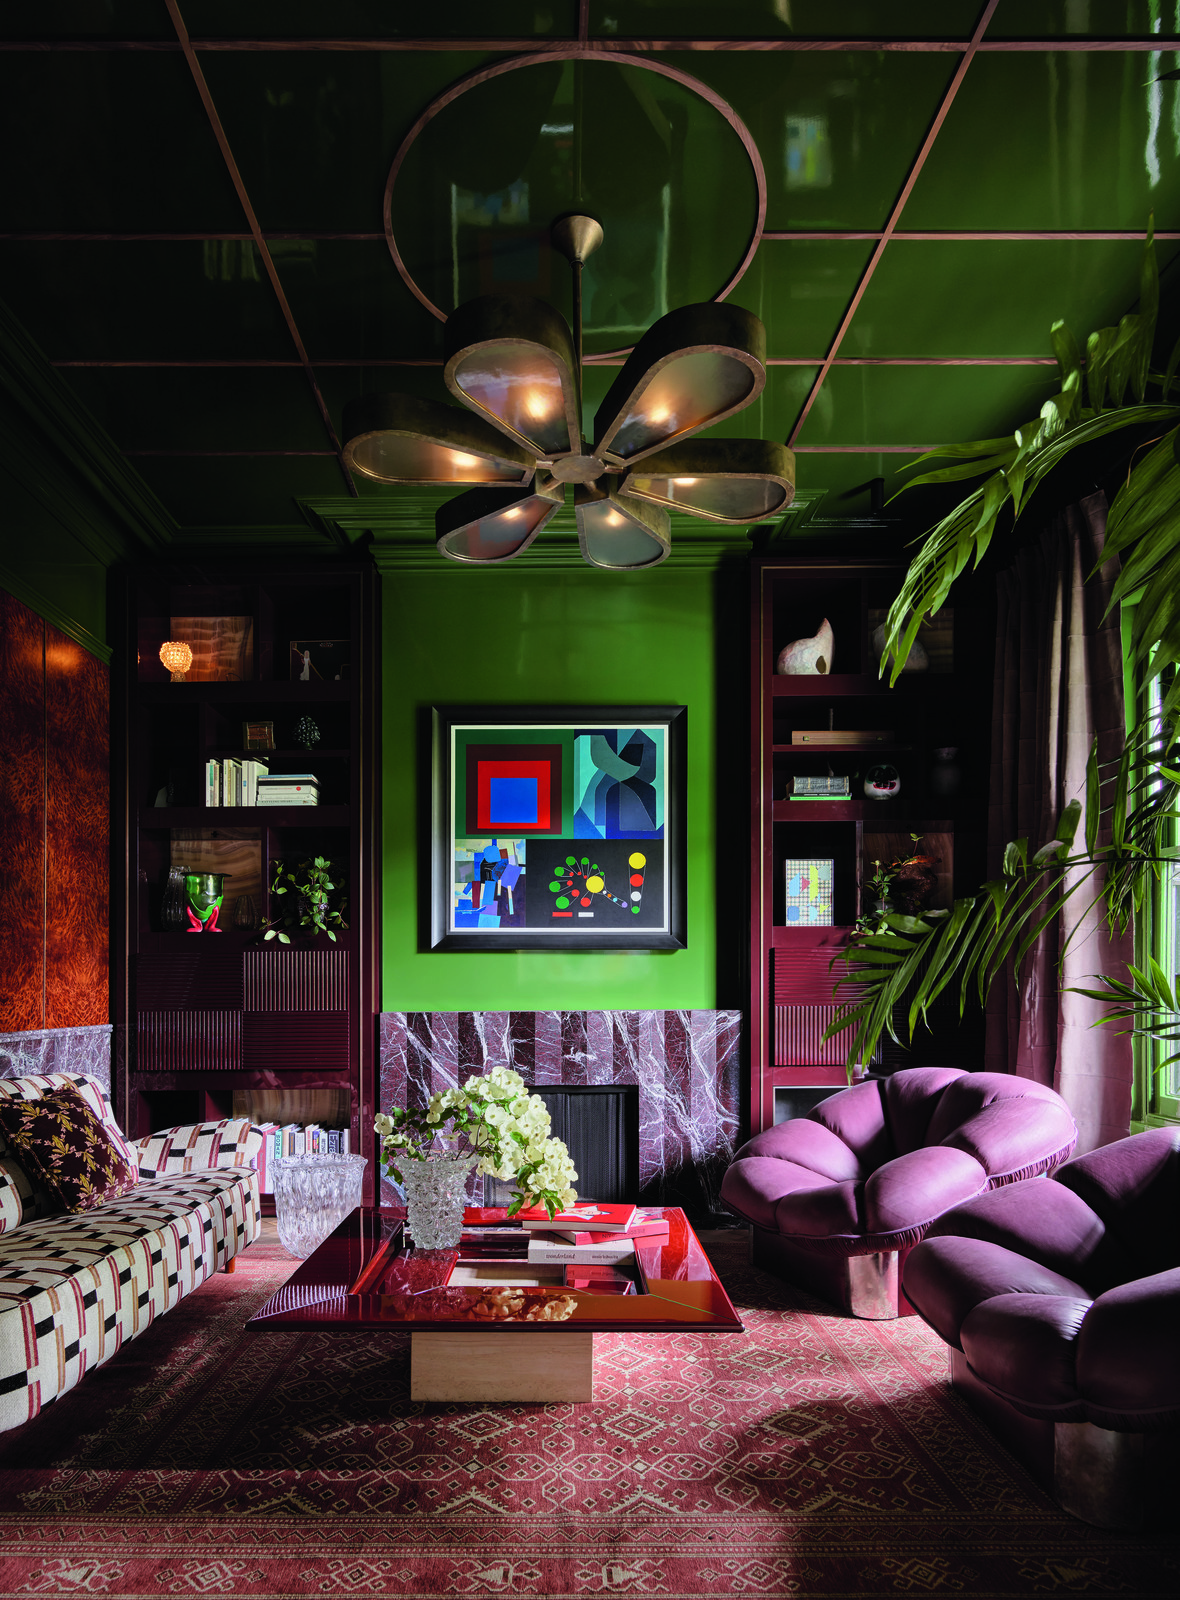 DREAMING IN COLOUR - VOGUE LIVING